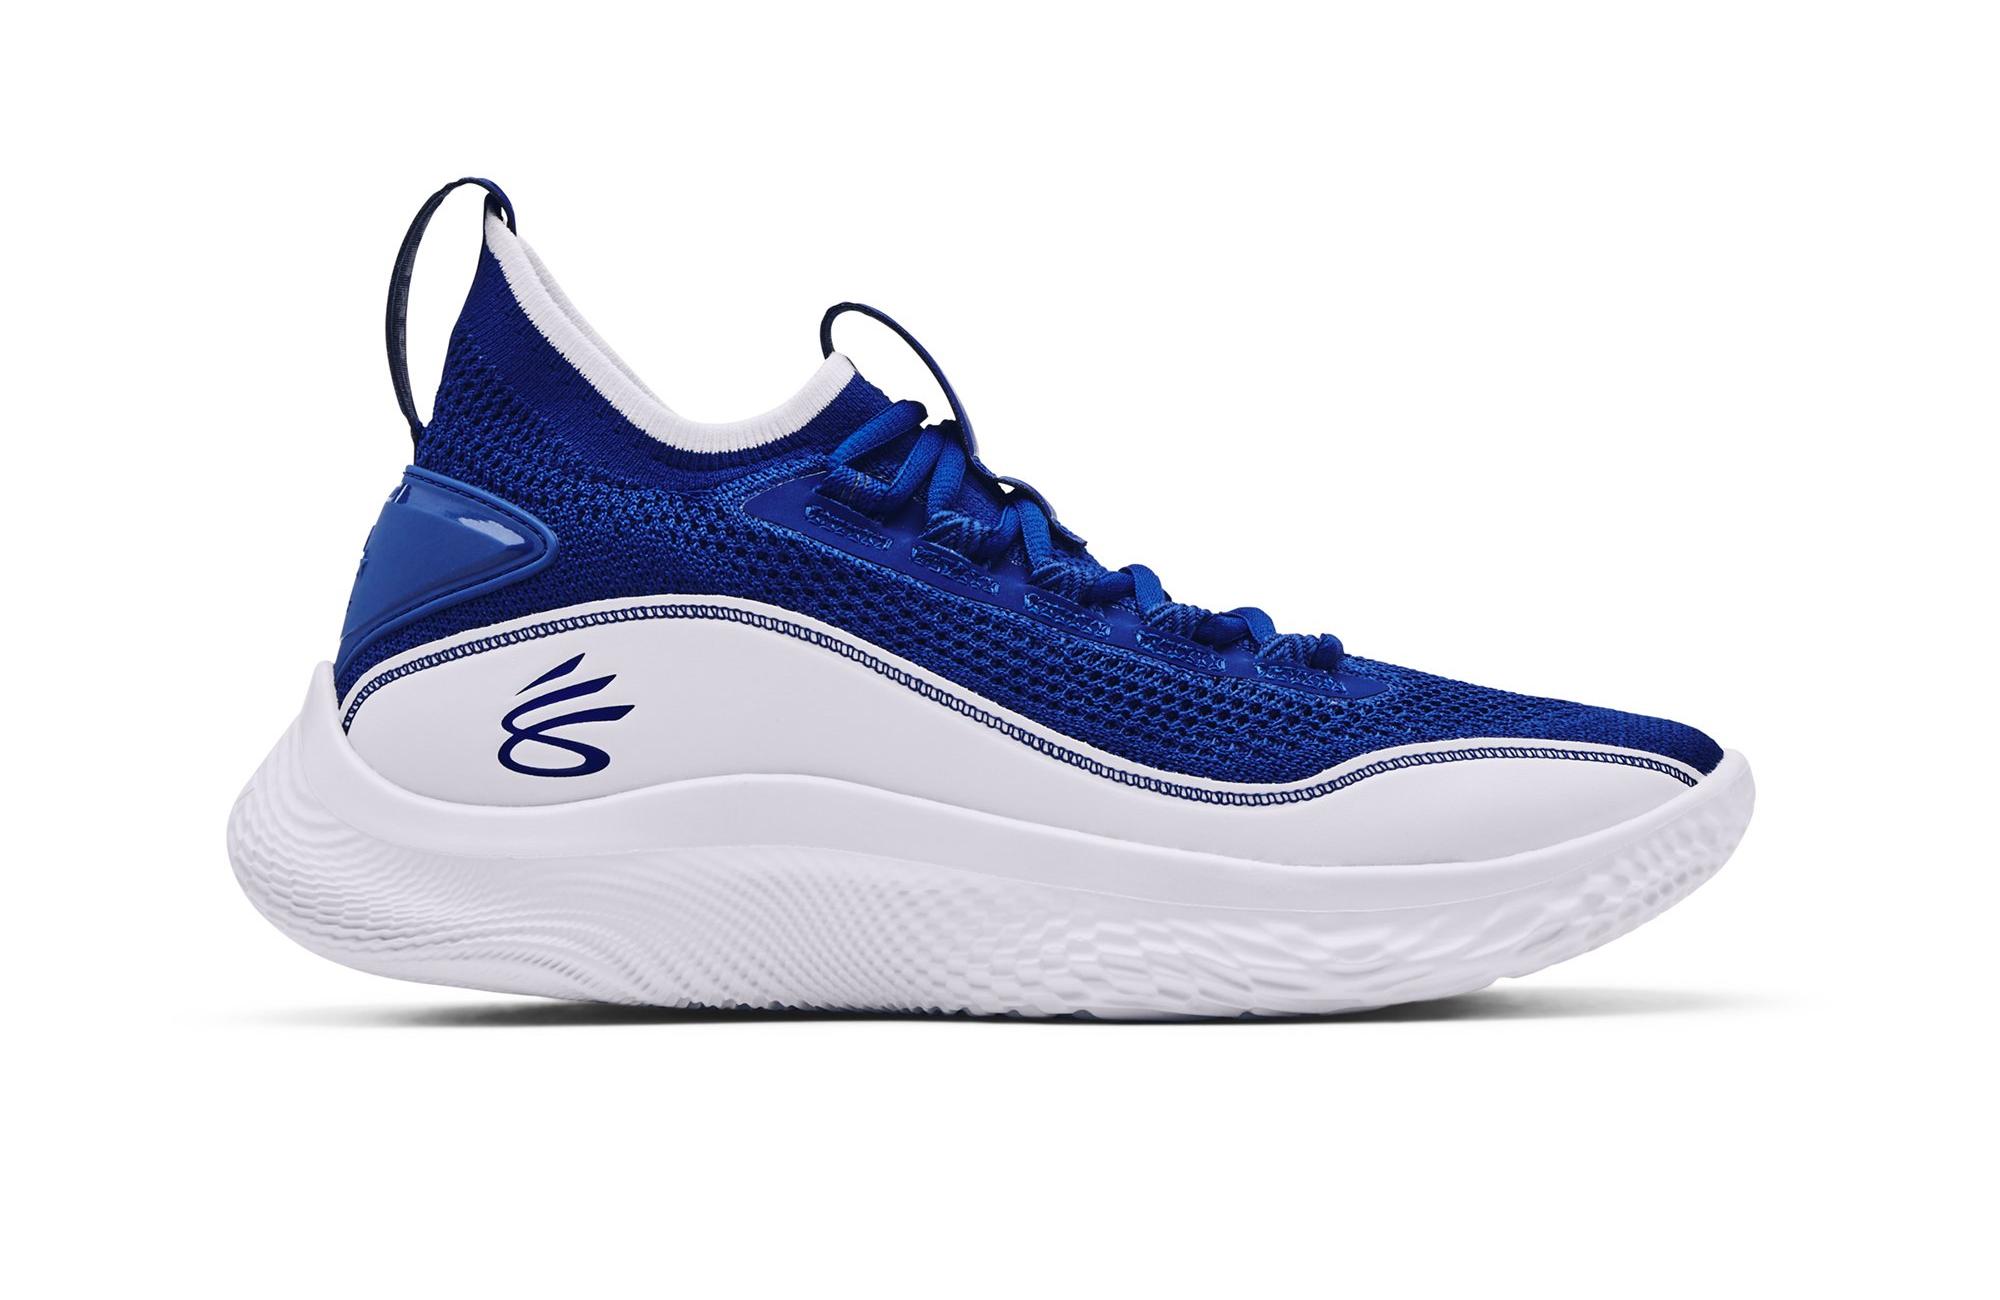 Sneakers Release Under Armour Curry Flow 8 “Like Water